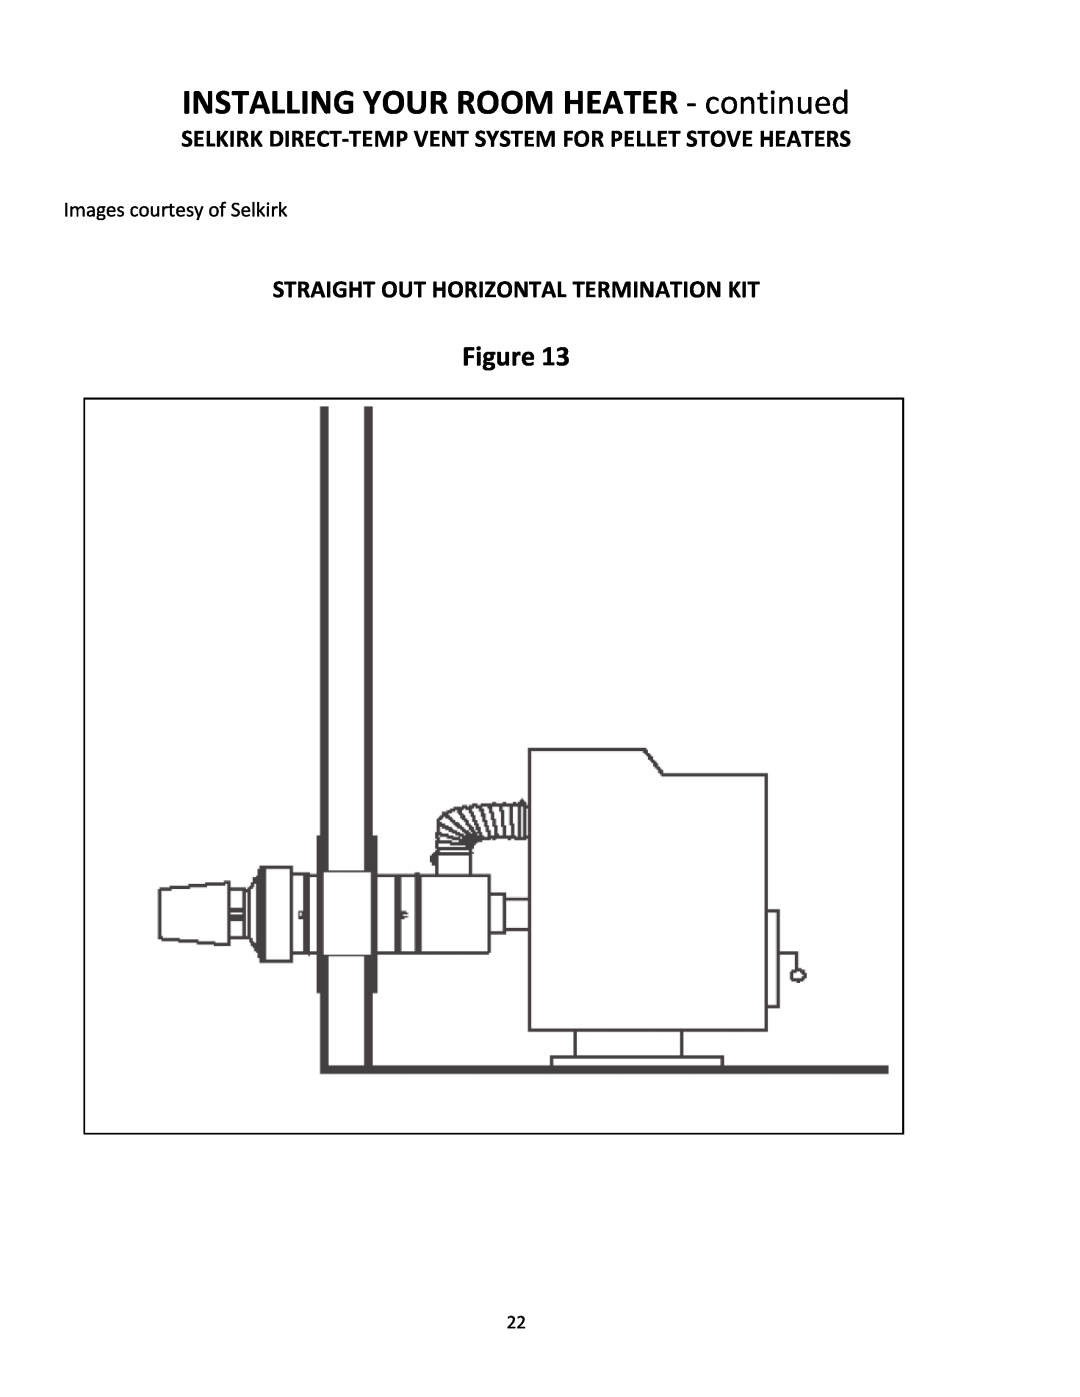 United States Stove 5660(I) manual Straight Out Horizontal Termination Kit, INSTALLING YOUR ROOM HEATER ‐ continued 